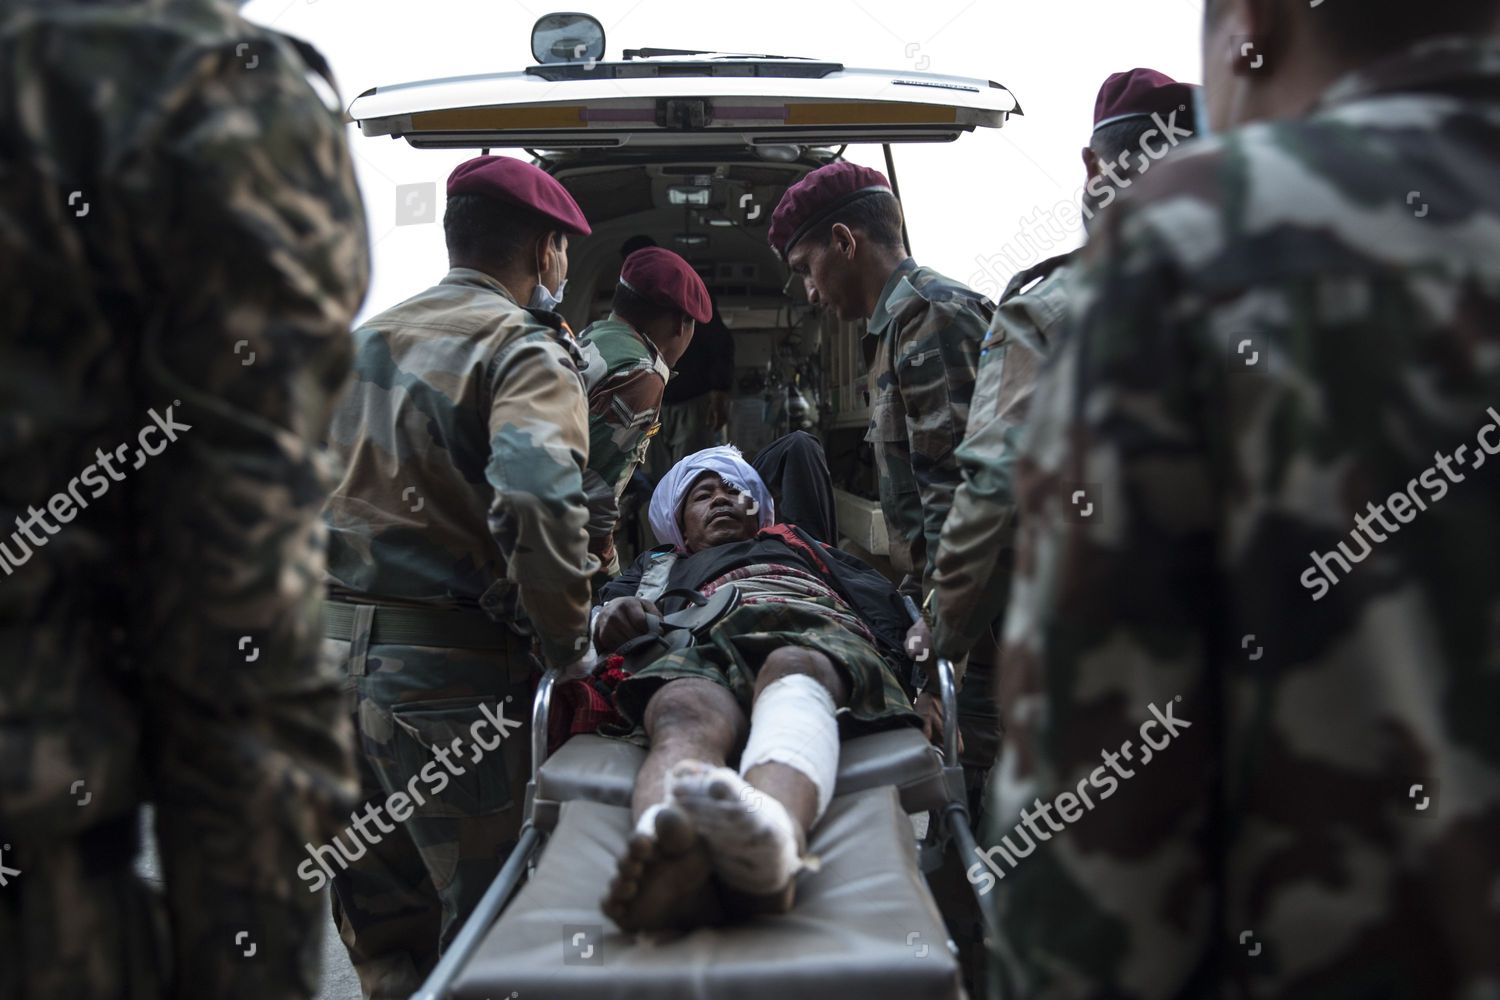 aftermath-of-earthquake-in-nepal-shutterstock-editorial-4755992f.jpg